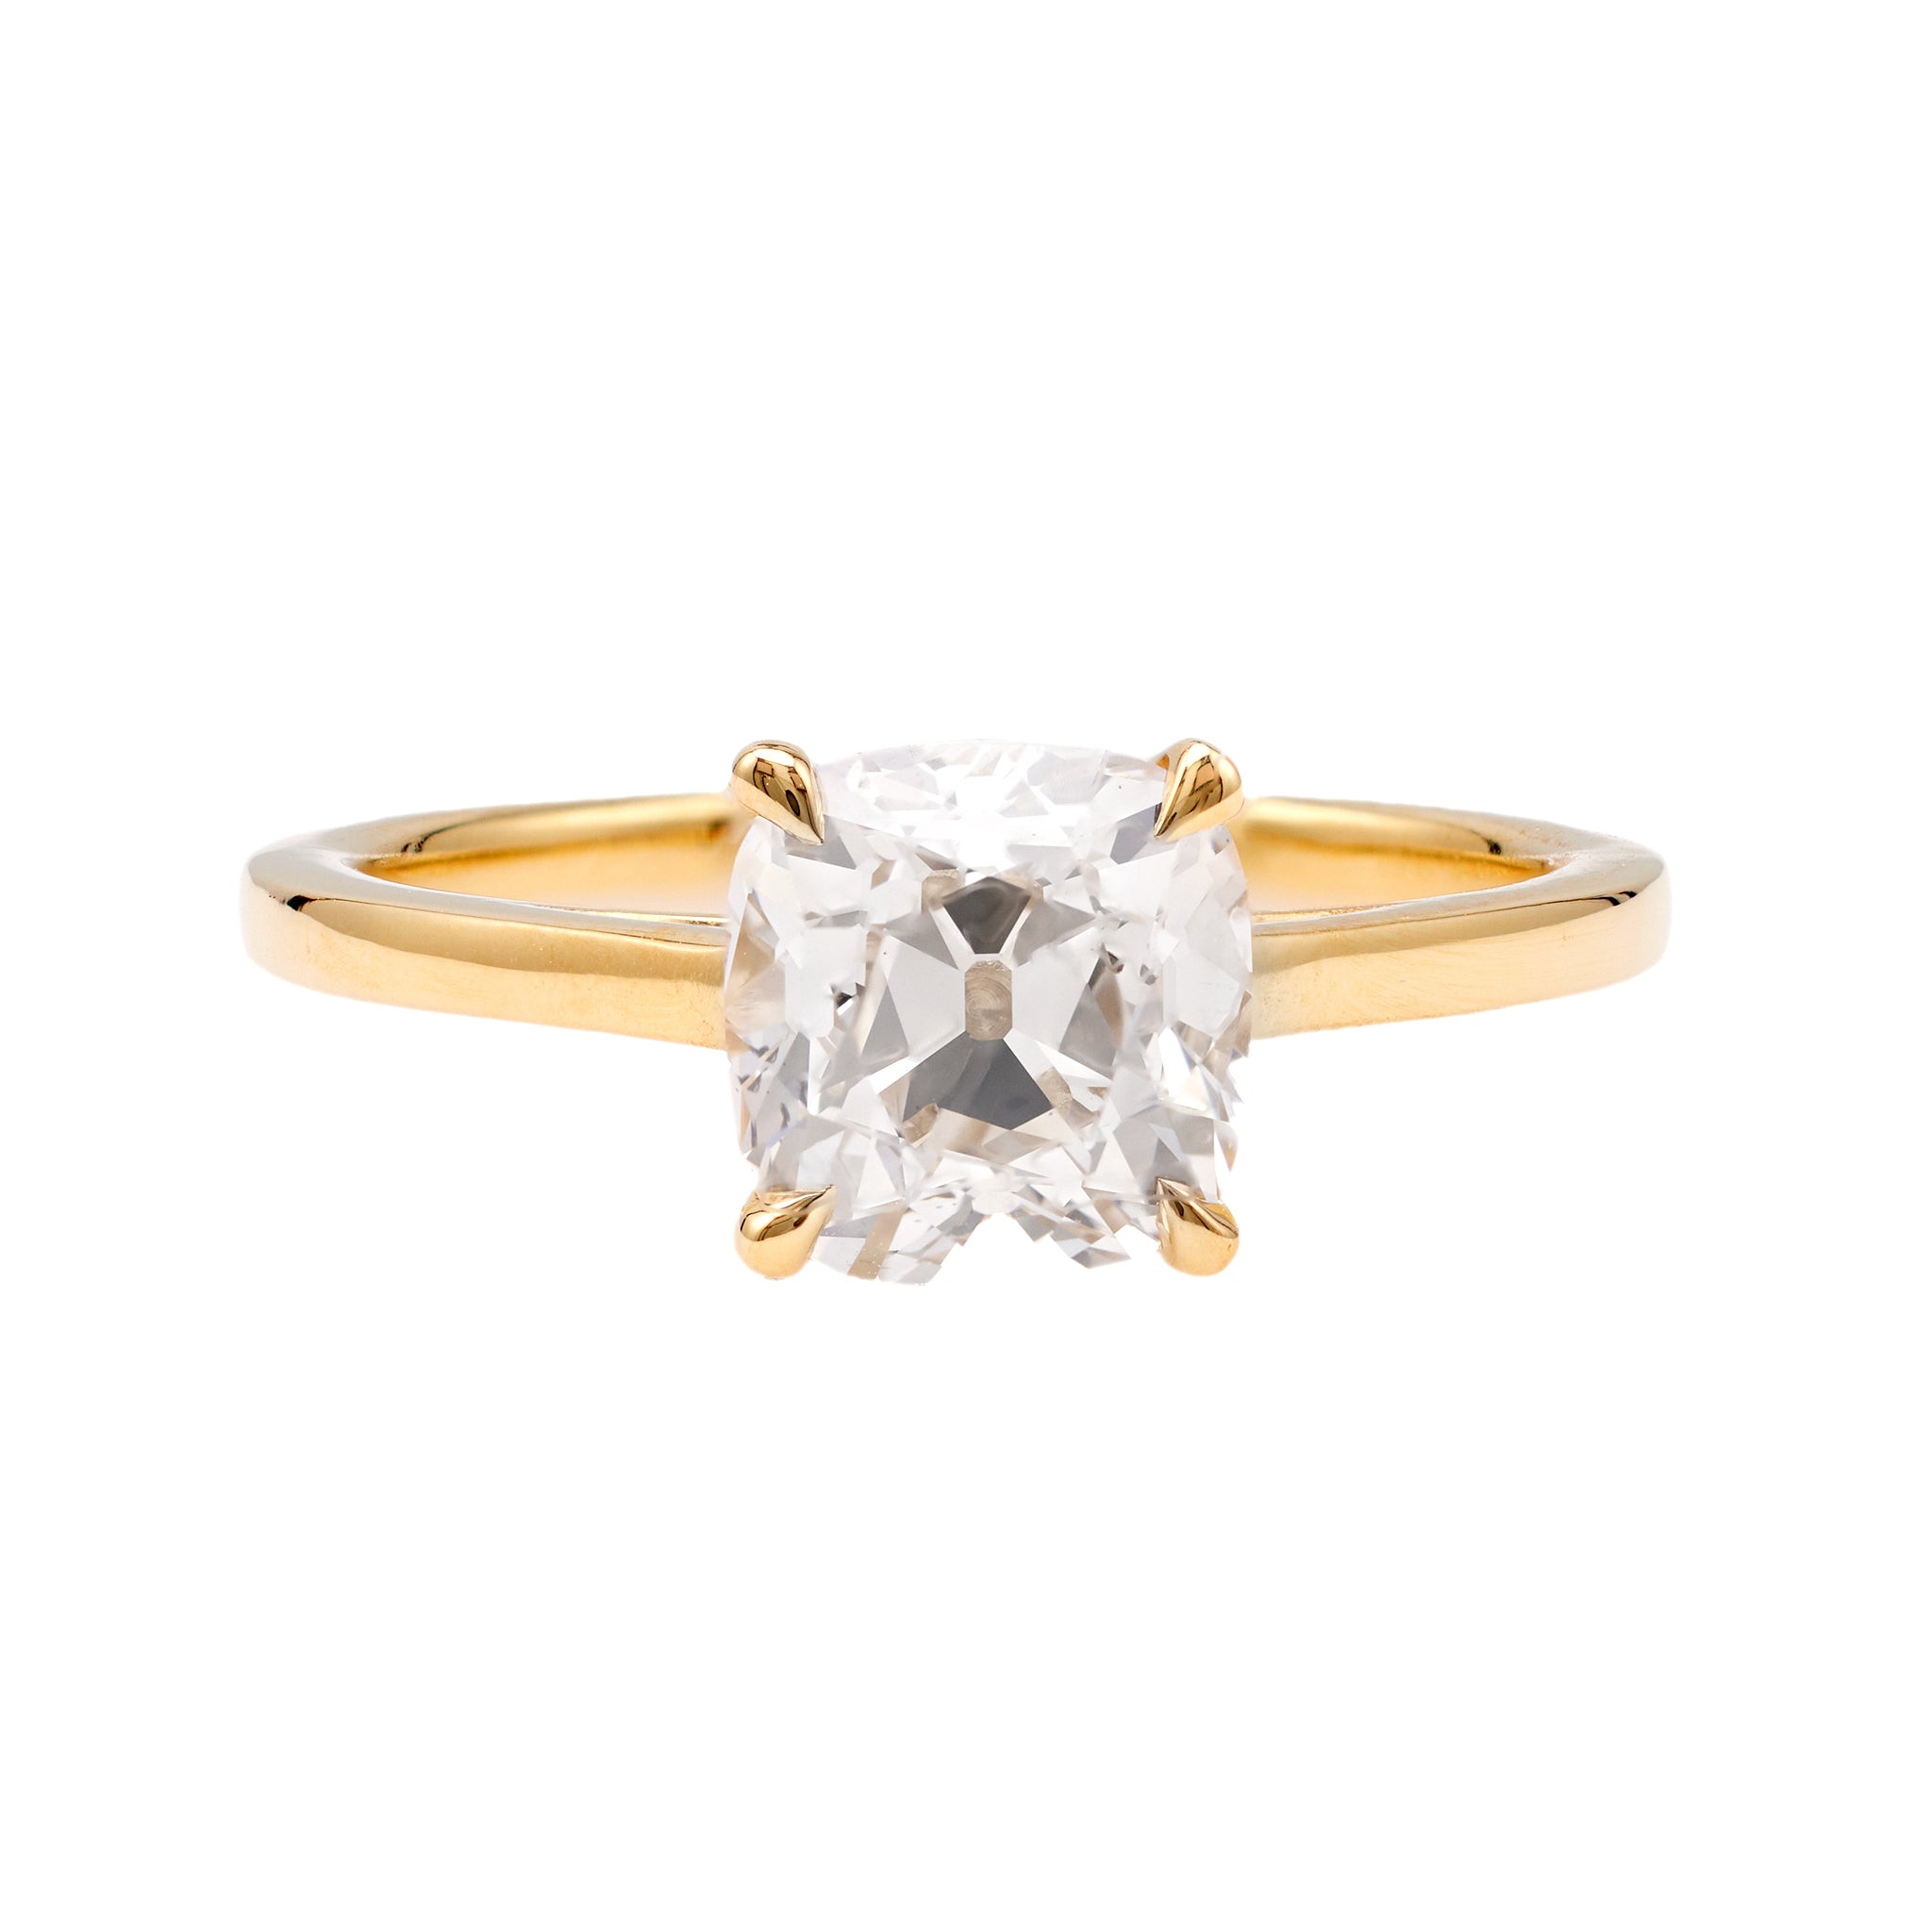 GIA 1.83 Carat Old Mine Cut Diamond 18k Yellow Gold Solitaire Ring Rings Jack Weir & Sons   